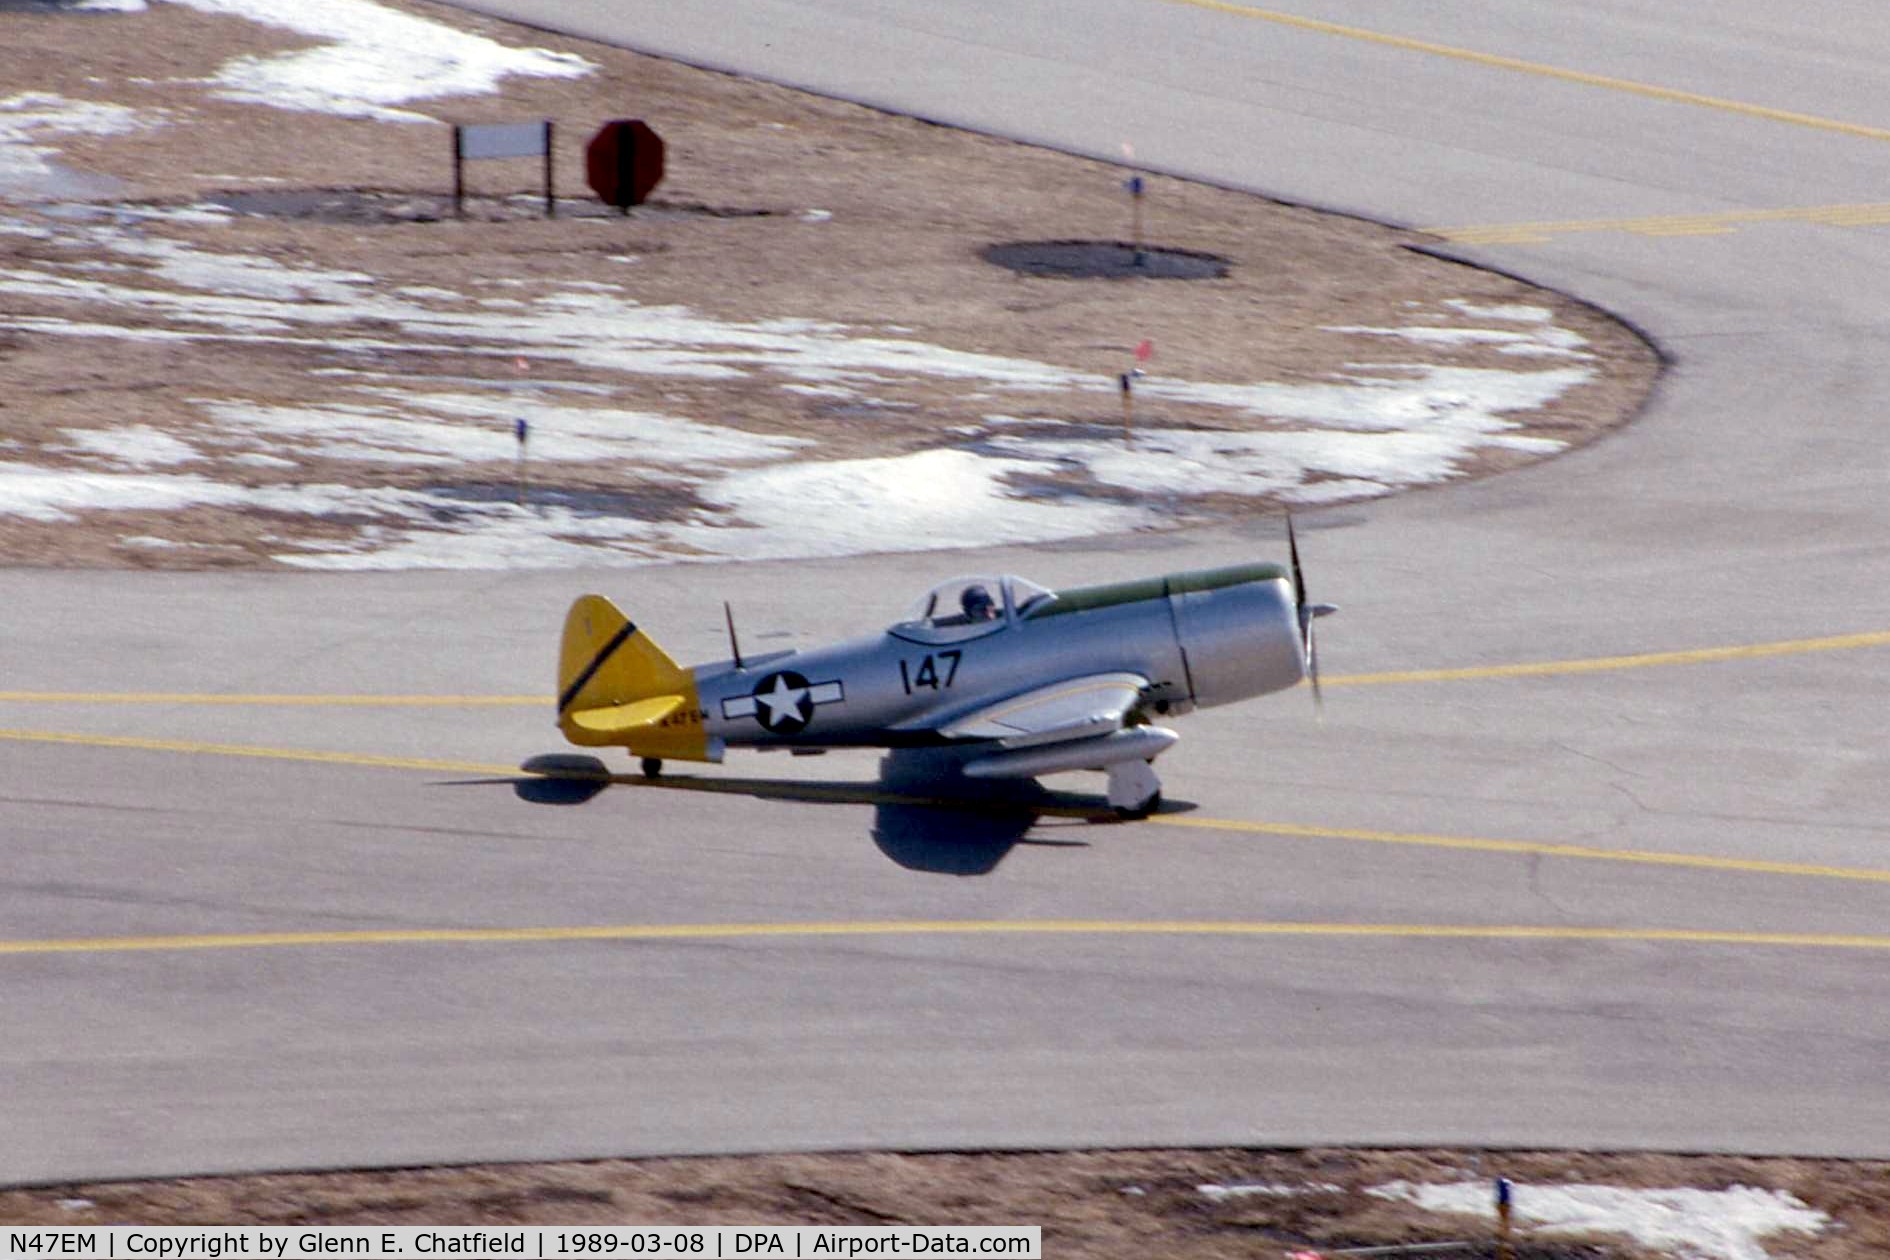 N47EM, 1988 WAR Republic P-47 Thunderbolt C/N 40, Little replica of a P-47 taxiing by the control tower.